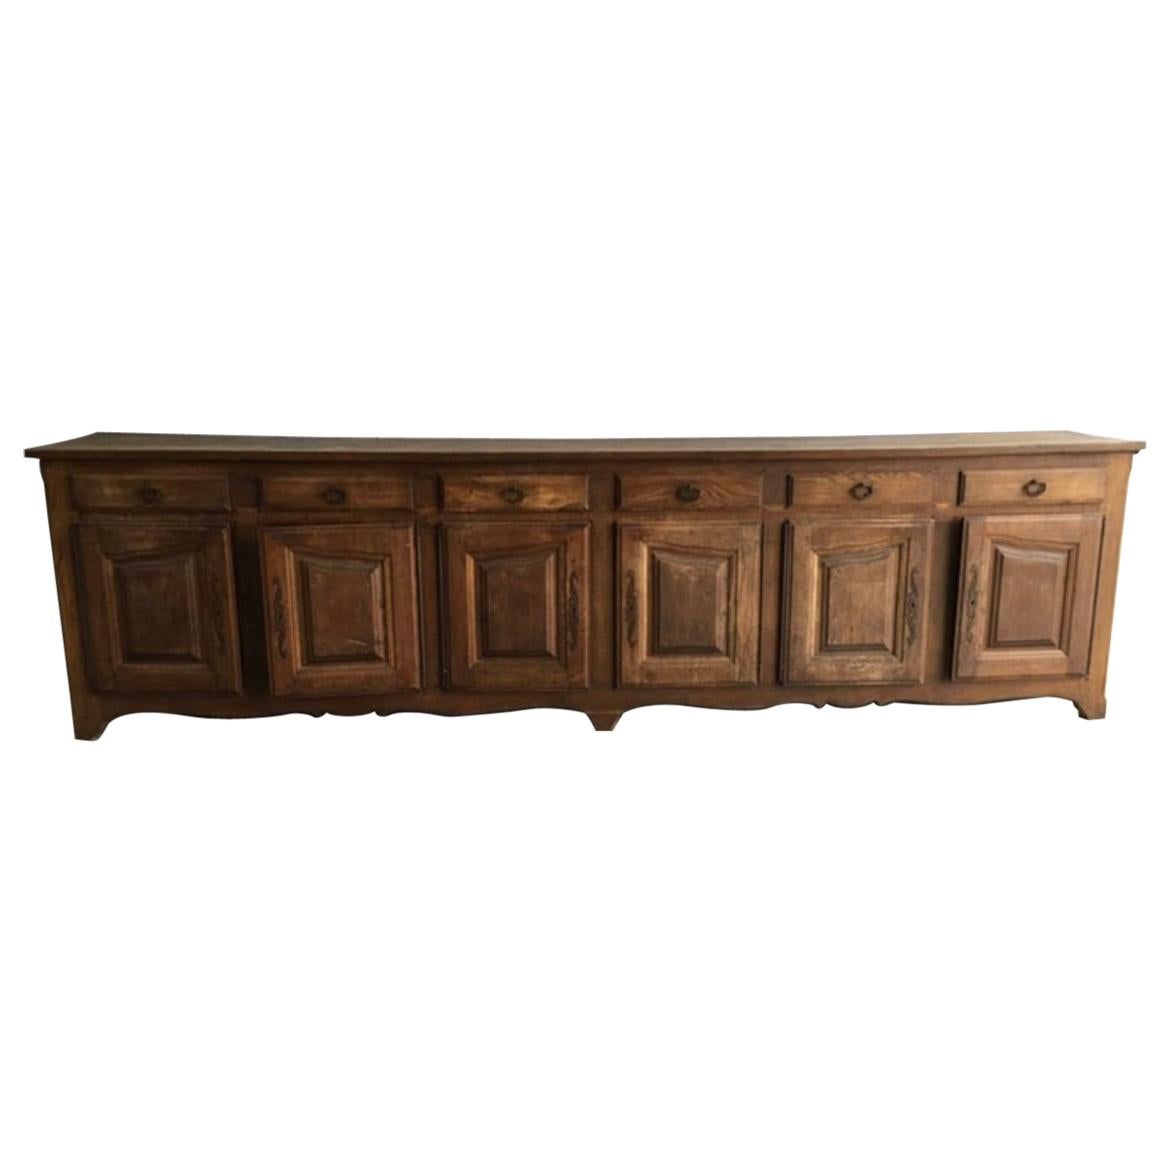 Large Scale 19th Century French 6 Door/ 6 Drawer Walnut Enfilade